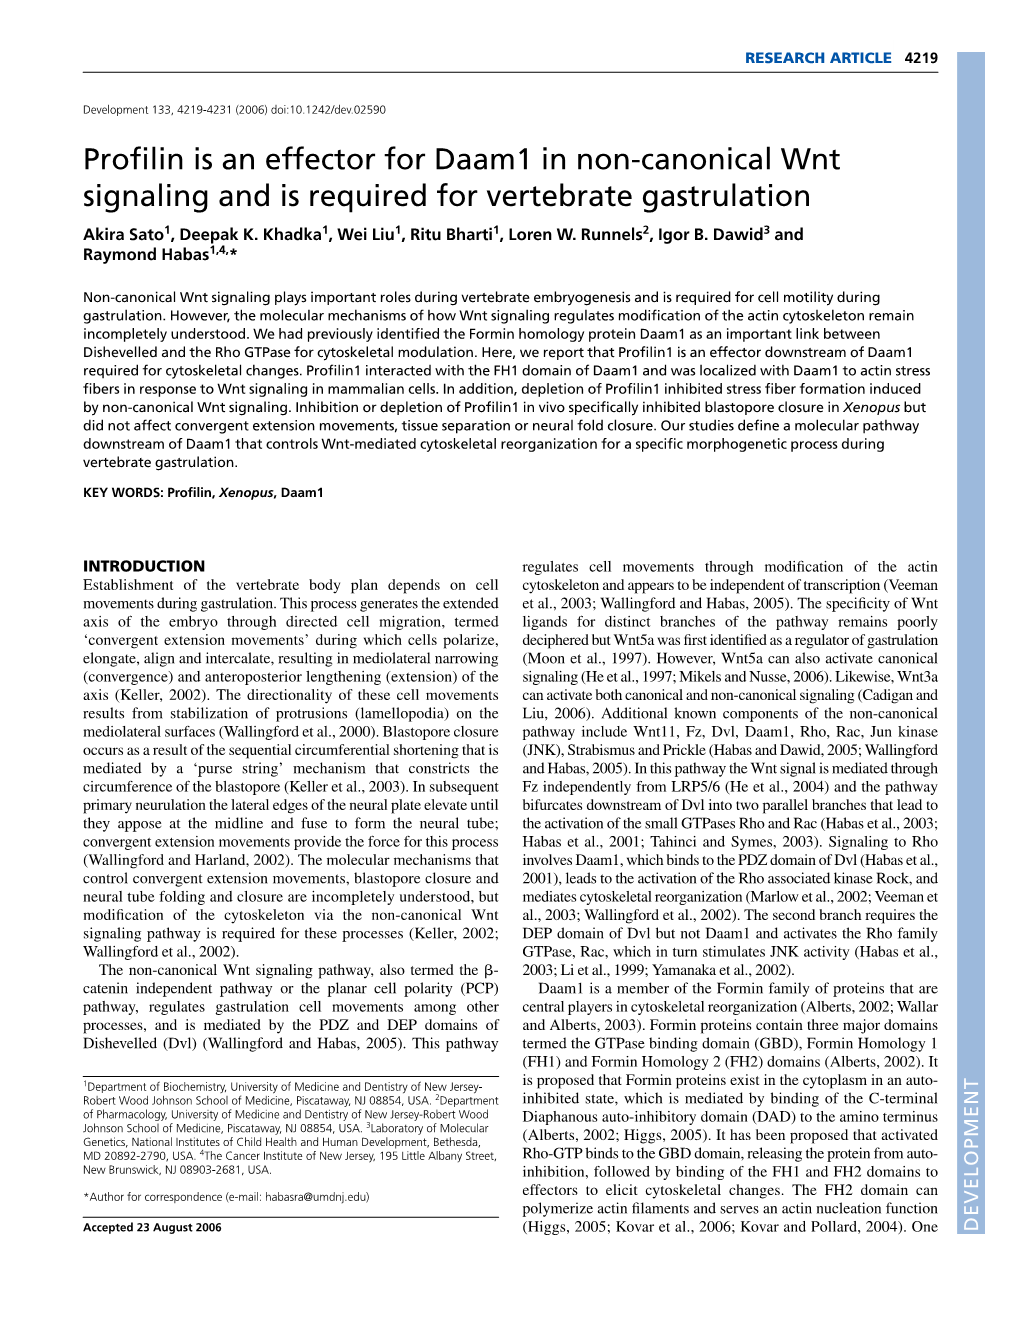 Profilin Is an Effector for Daam1 in Non-Canonical Wnt Signaling and Is Required for Vertebrate Gastrulation